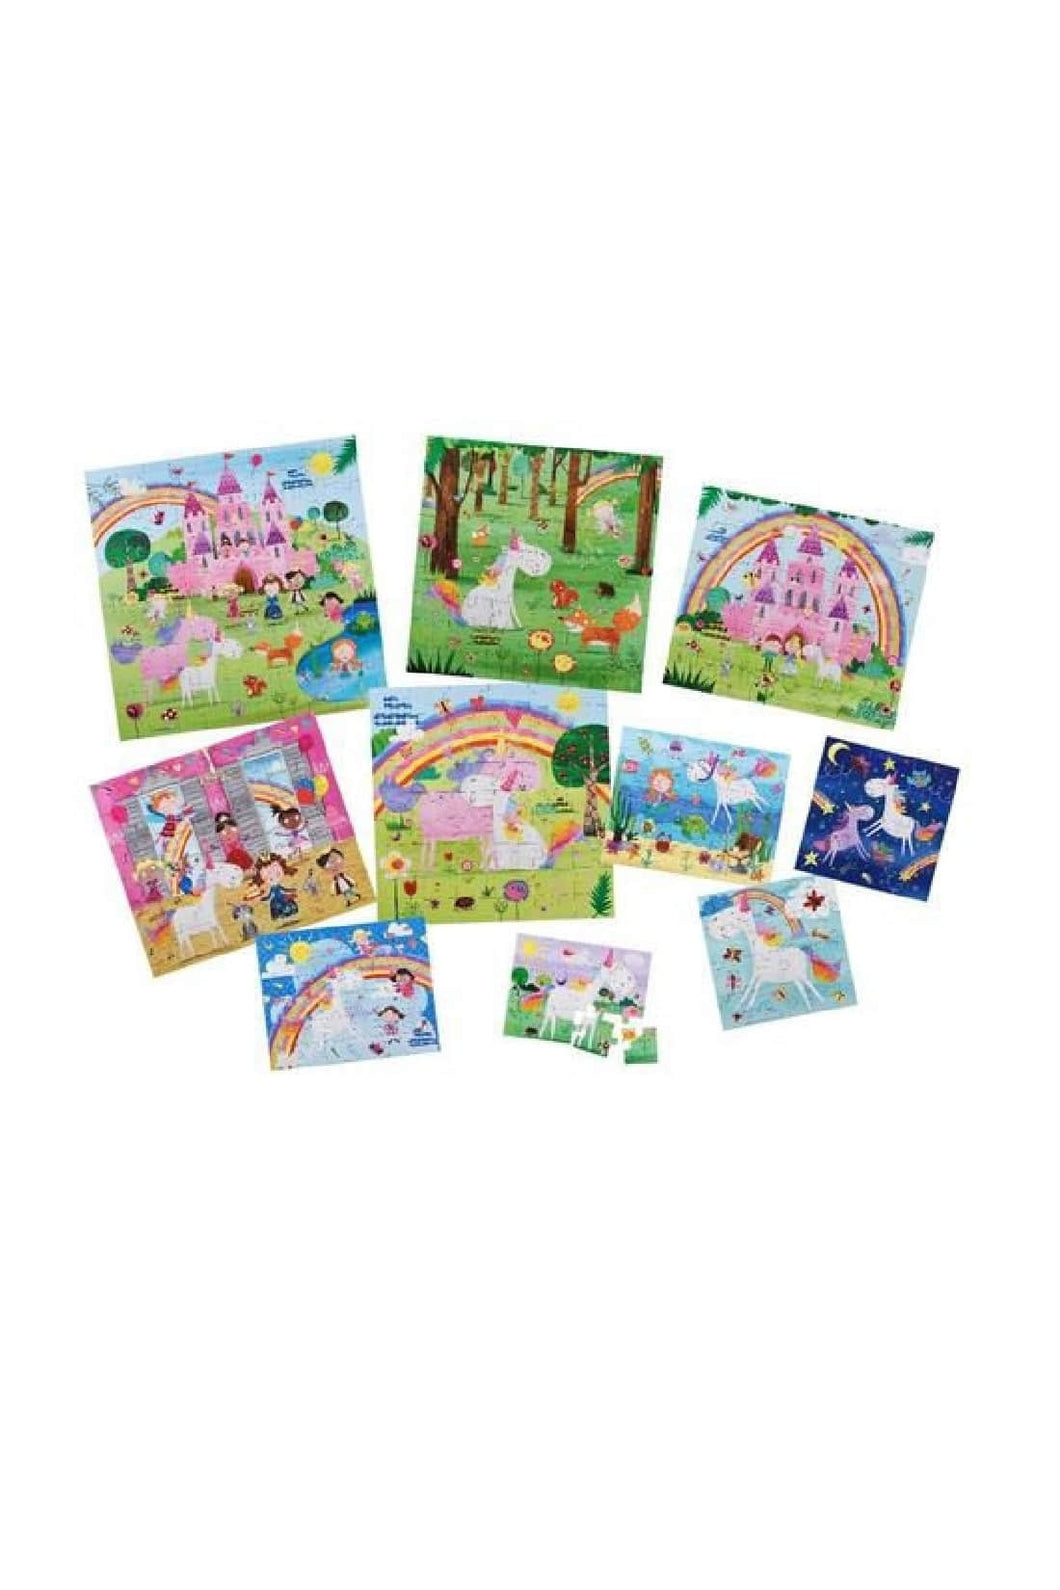 Early Learning Centre 10 In 1 Unicorn Puzzle Set